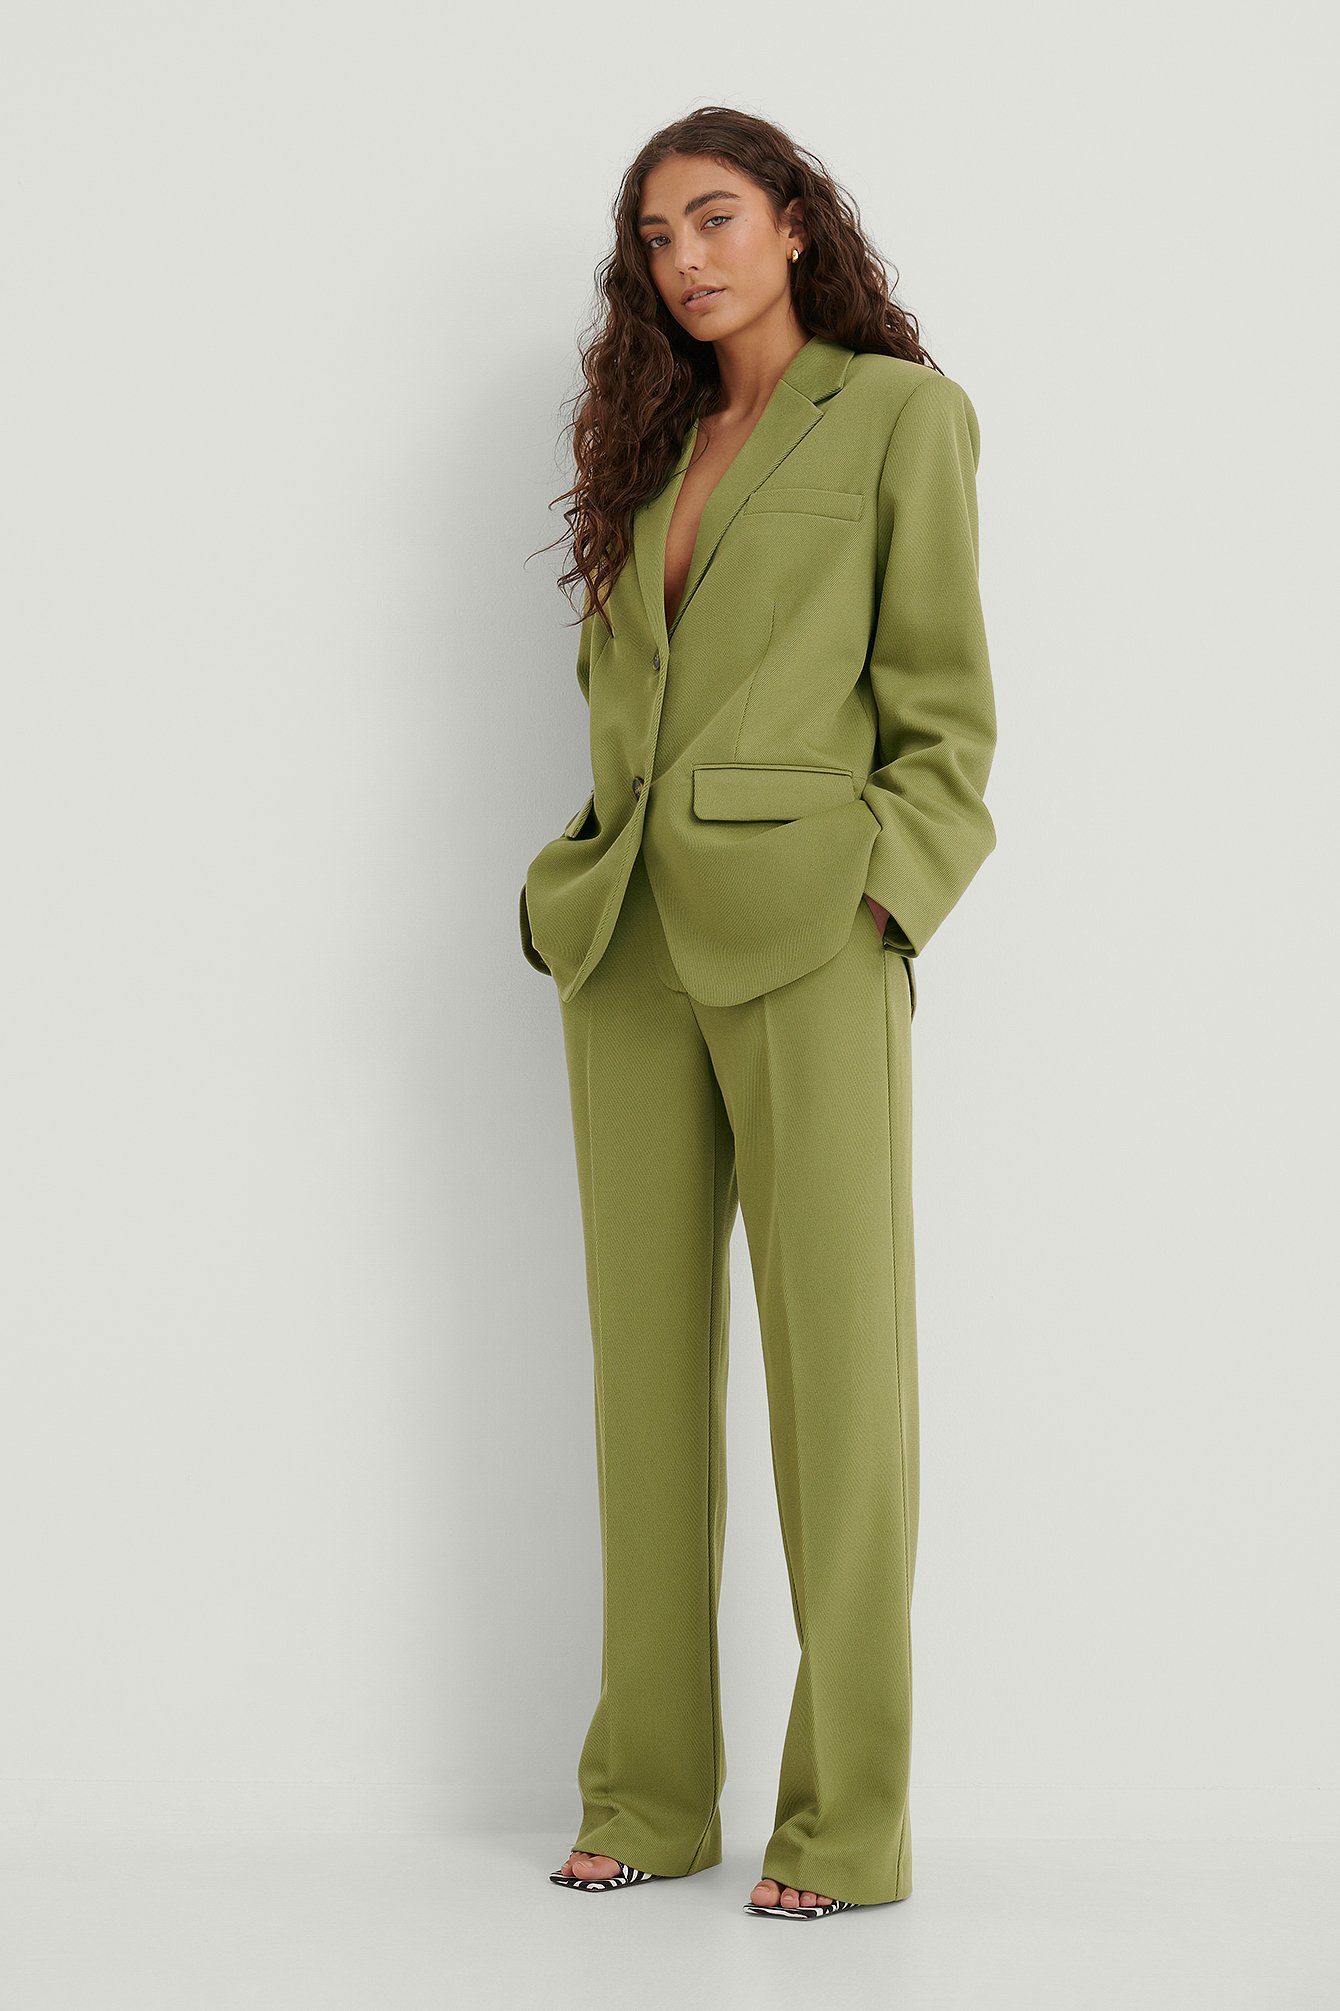 Green Twill Suit Pants